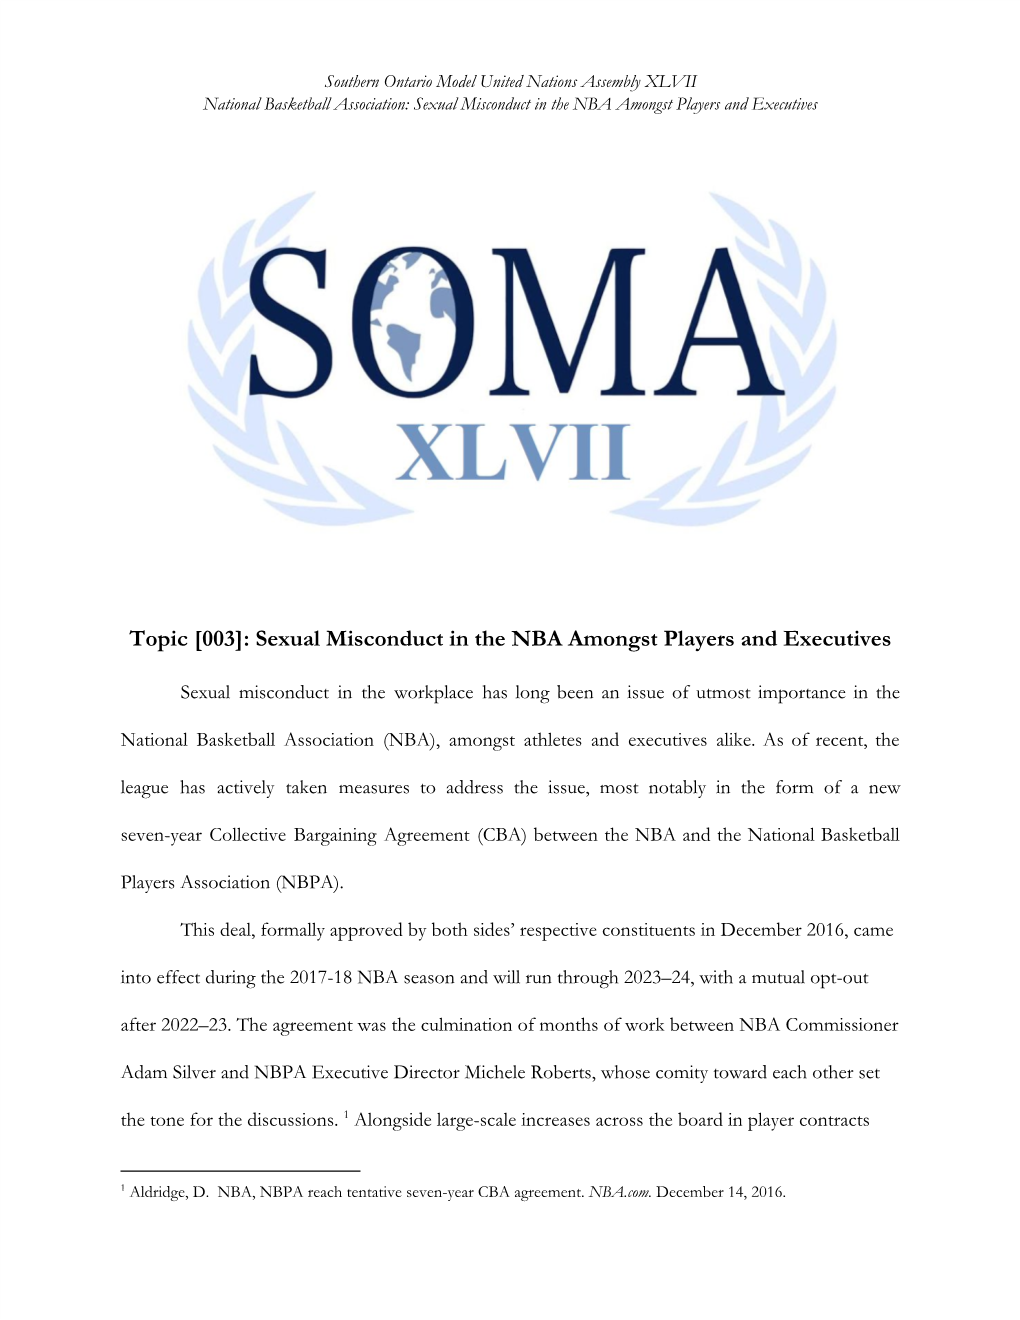 Topic [003]: Sexual Misconduct in the NBA Amongst Players and Executives